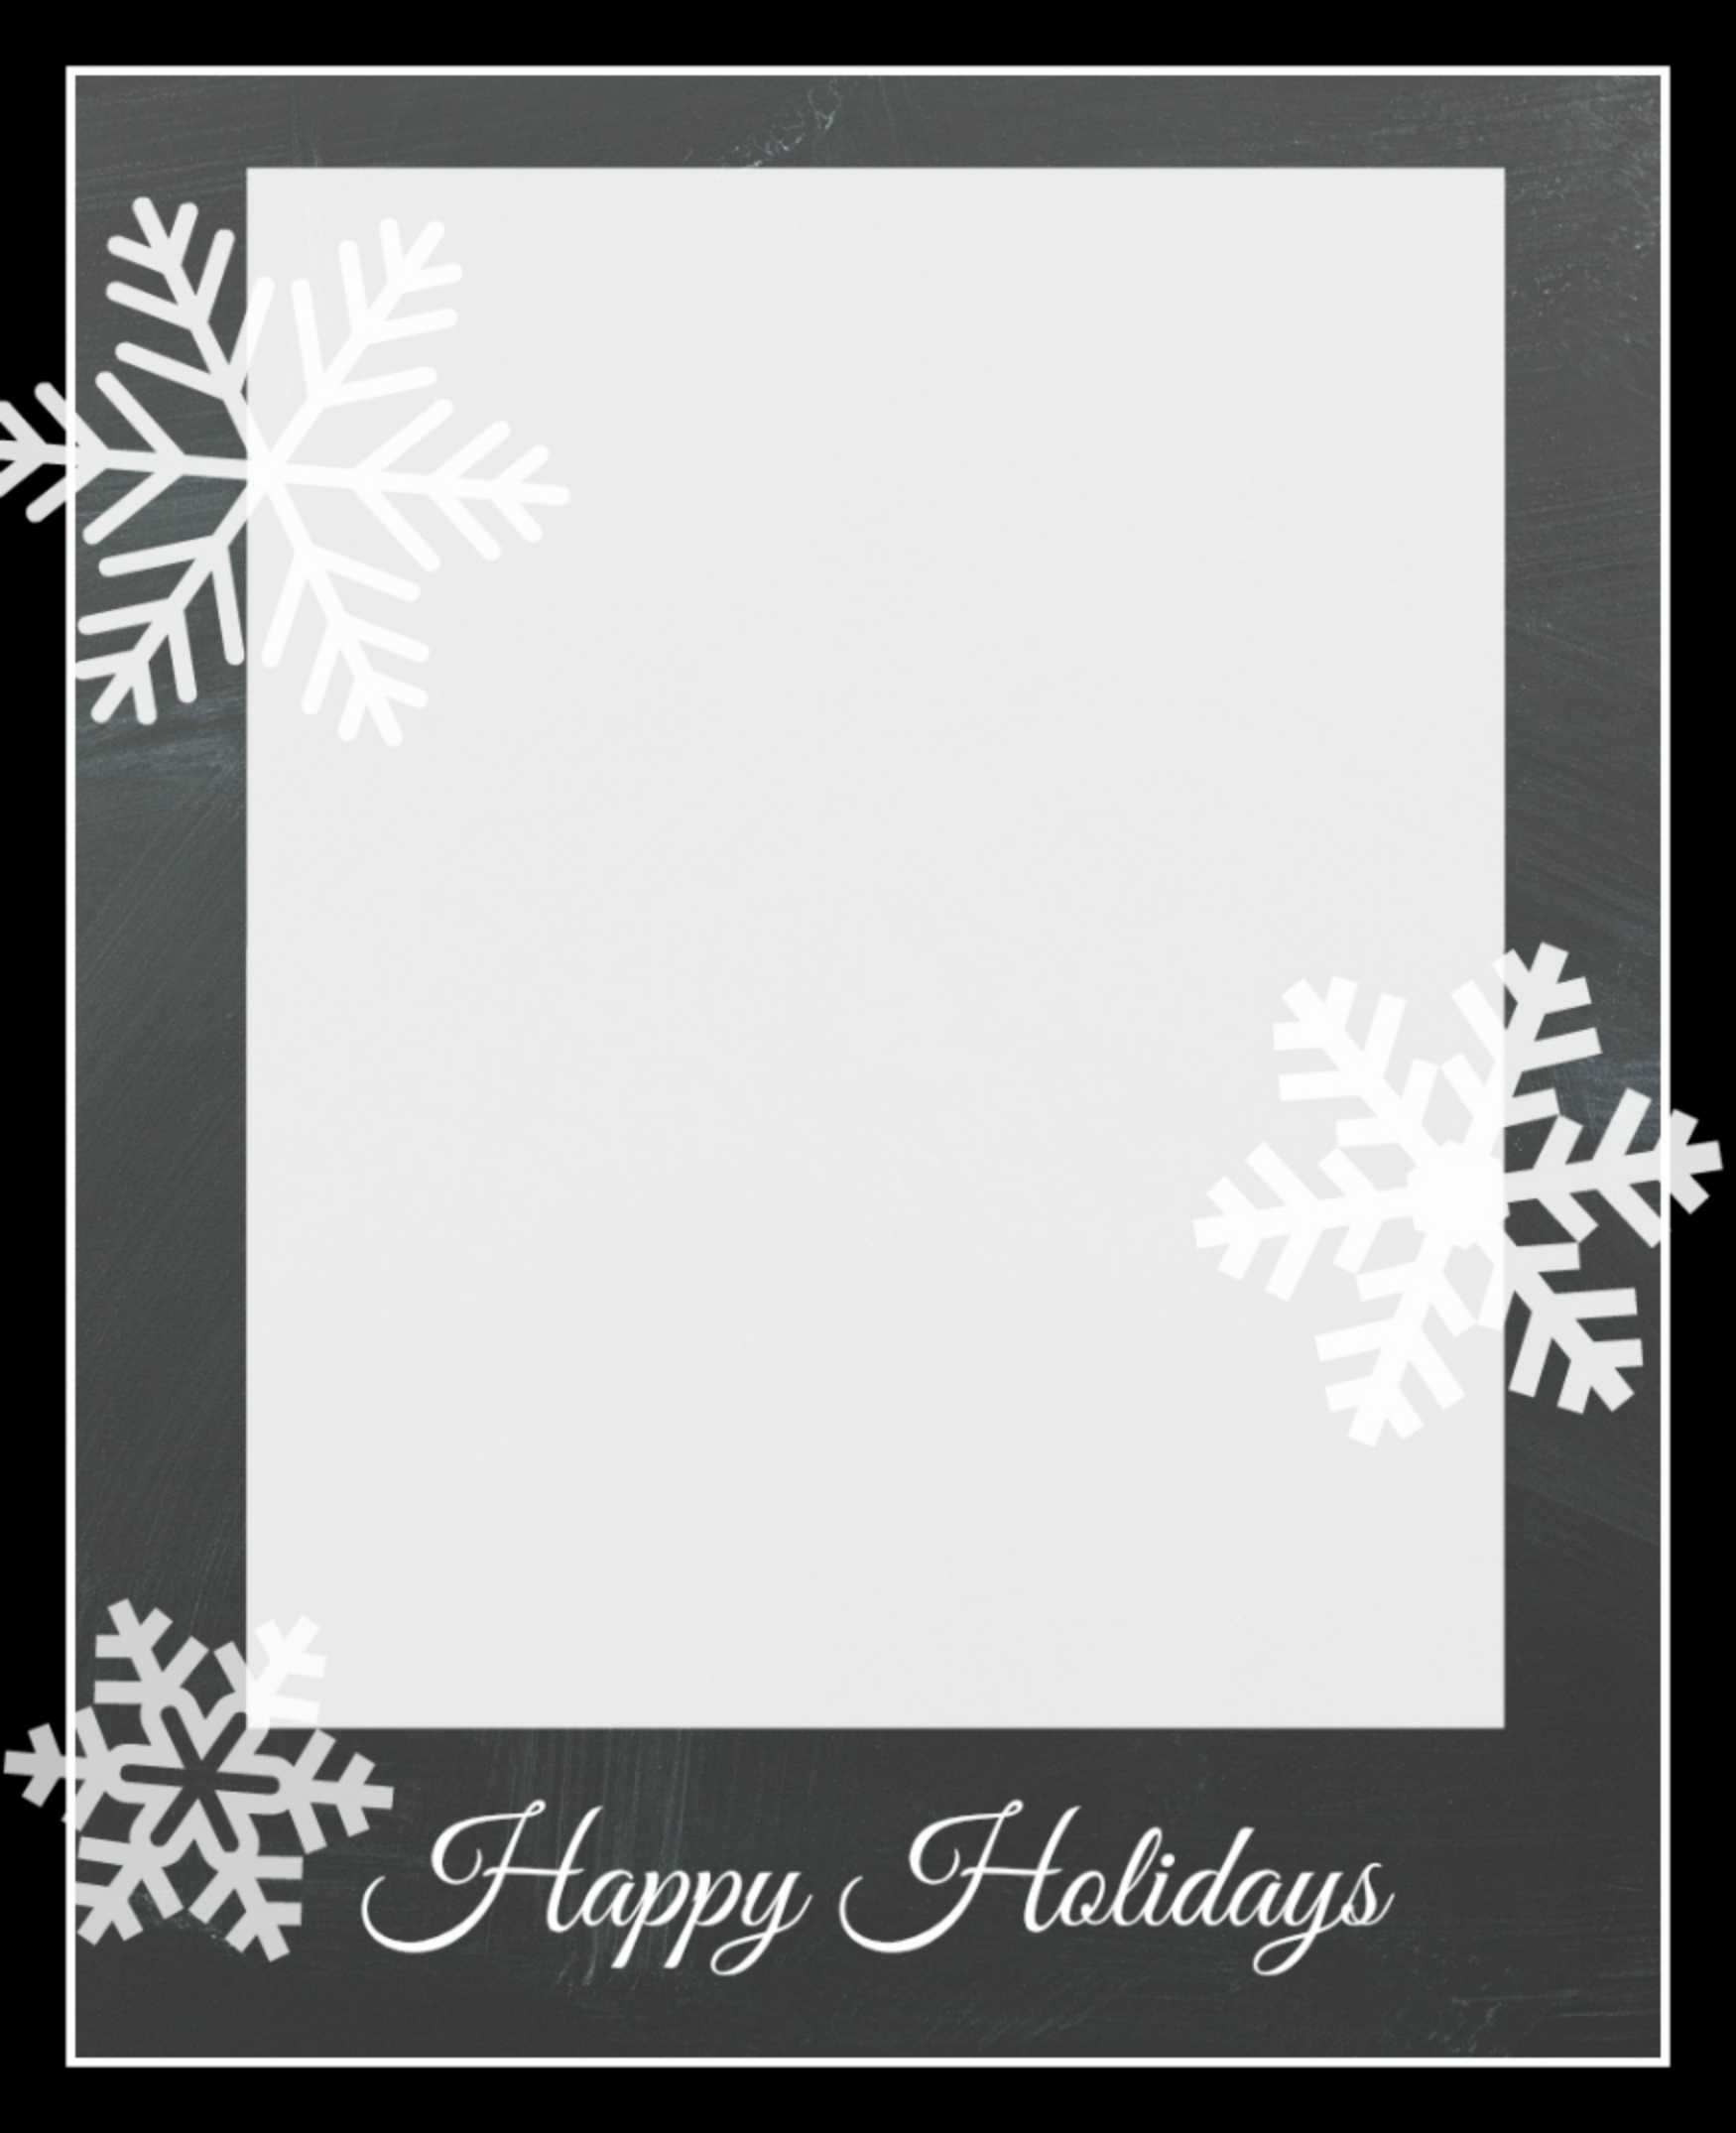 Free Picture Christmas Card Templates - Milas With Regard To Free Holiday Photo Card Templates